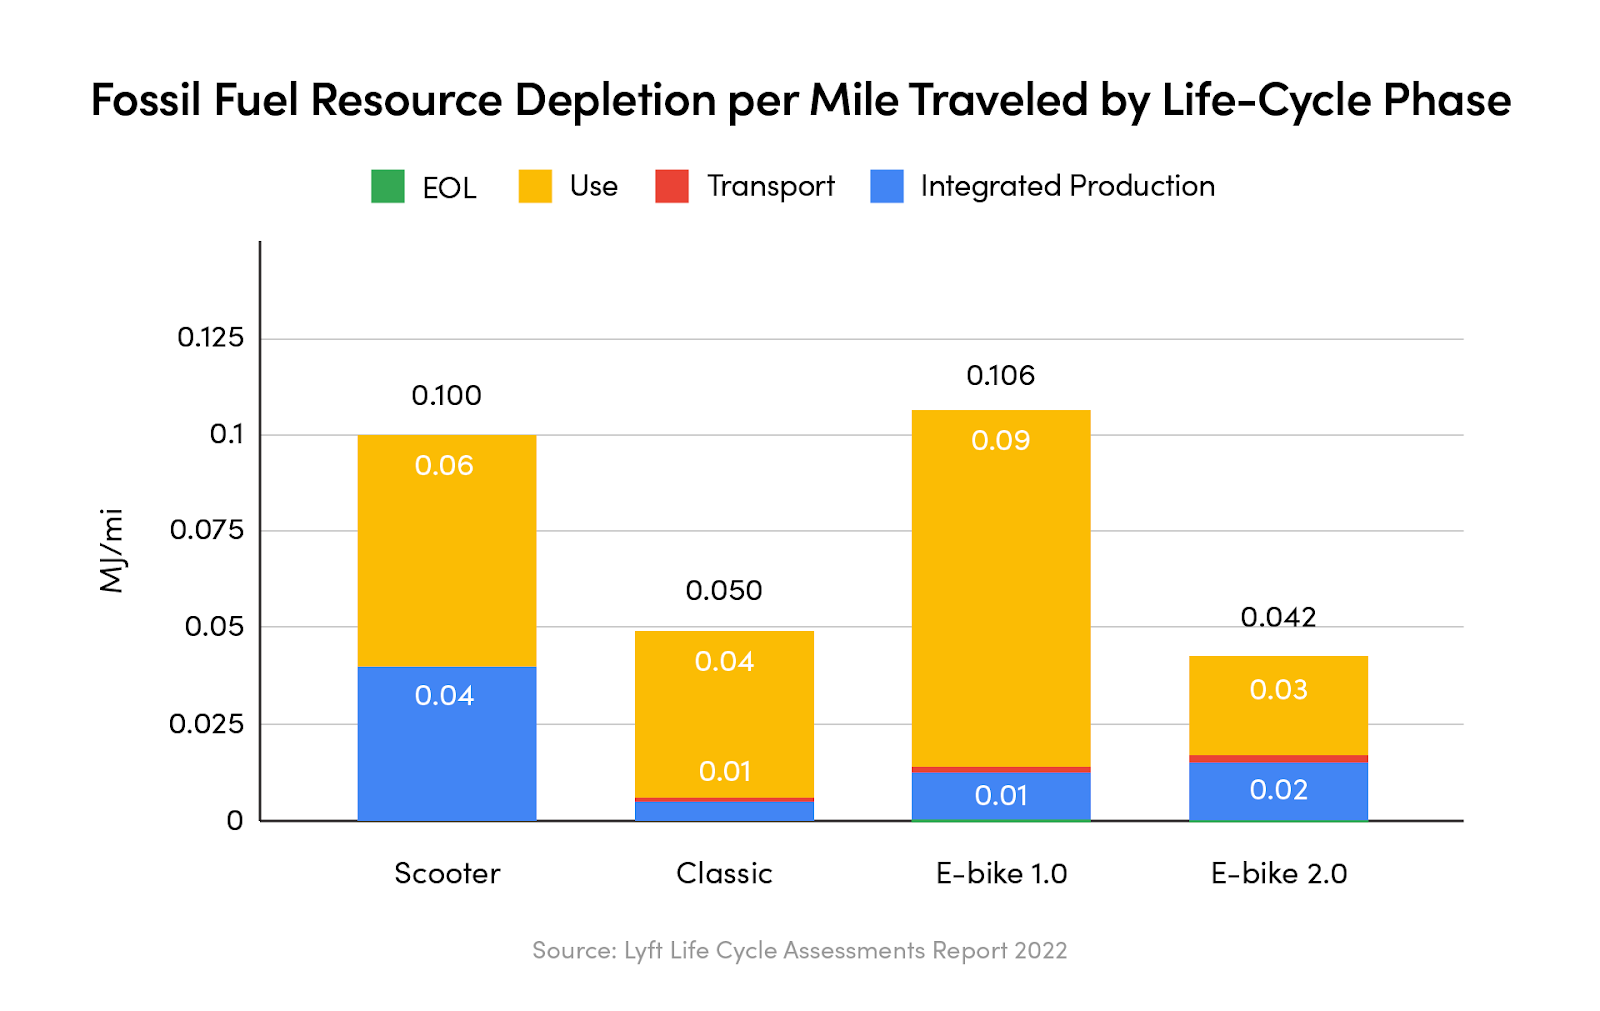 Bar graph illustration: Fossil Fuel Resource Depletion per Mile Traveled by Life-Cycle Phase. Bars made up of EOL, Use, Transport and Integrated Production. Scooter: 0.100 MJ/mi, Classic 0.050 MJ/mi, E-bike 1.0 0.106, E-bike 2.0 0.042